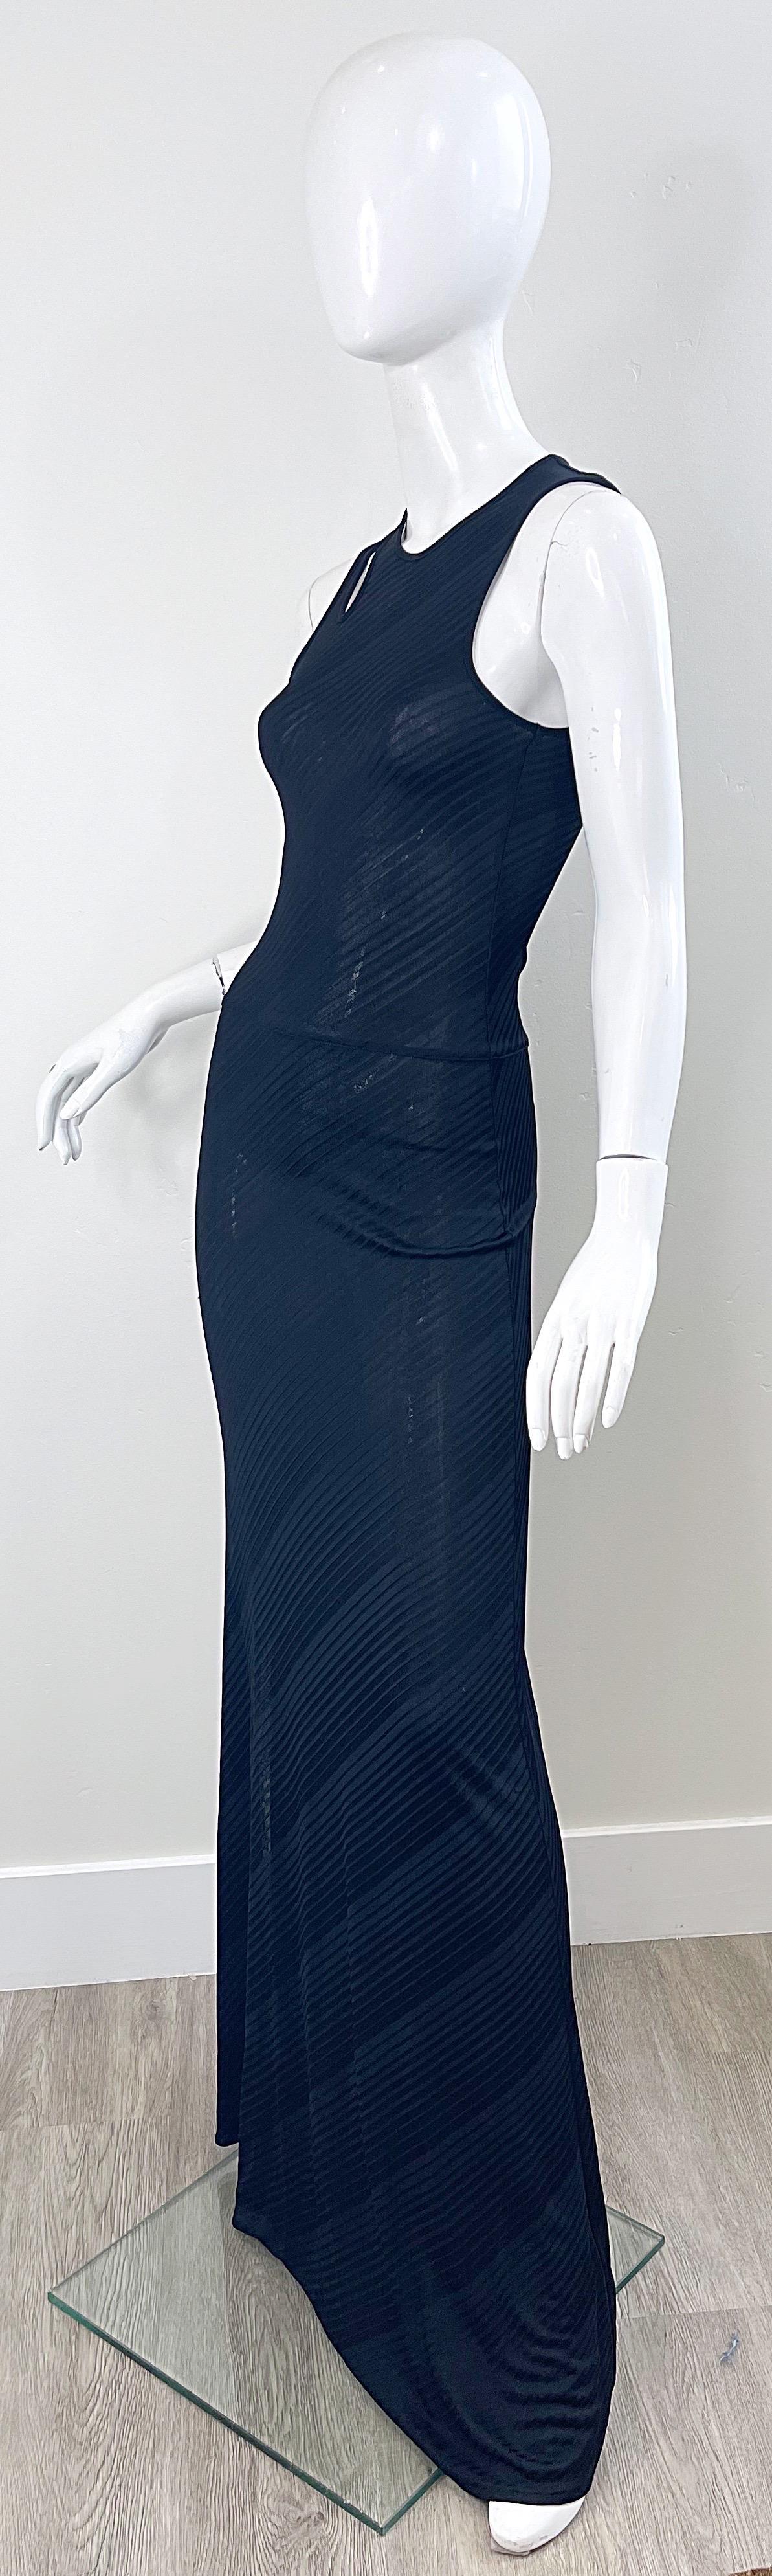 Gianni Versace Versus Spring 2001 Black Cut Out Sleeveless Vintage Jersey Gown  For Sale 10